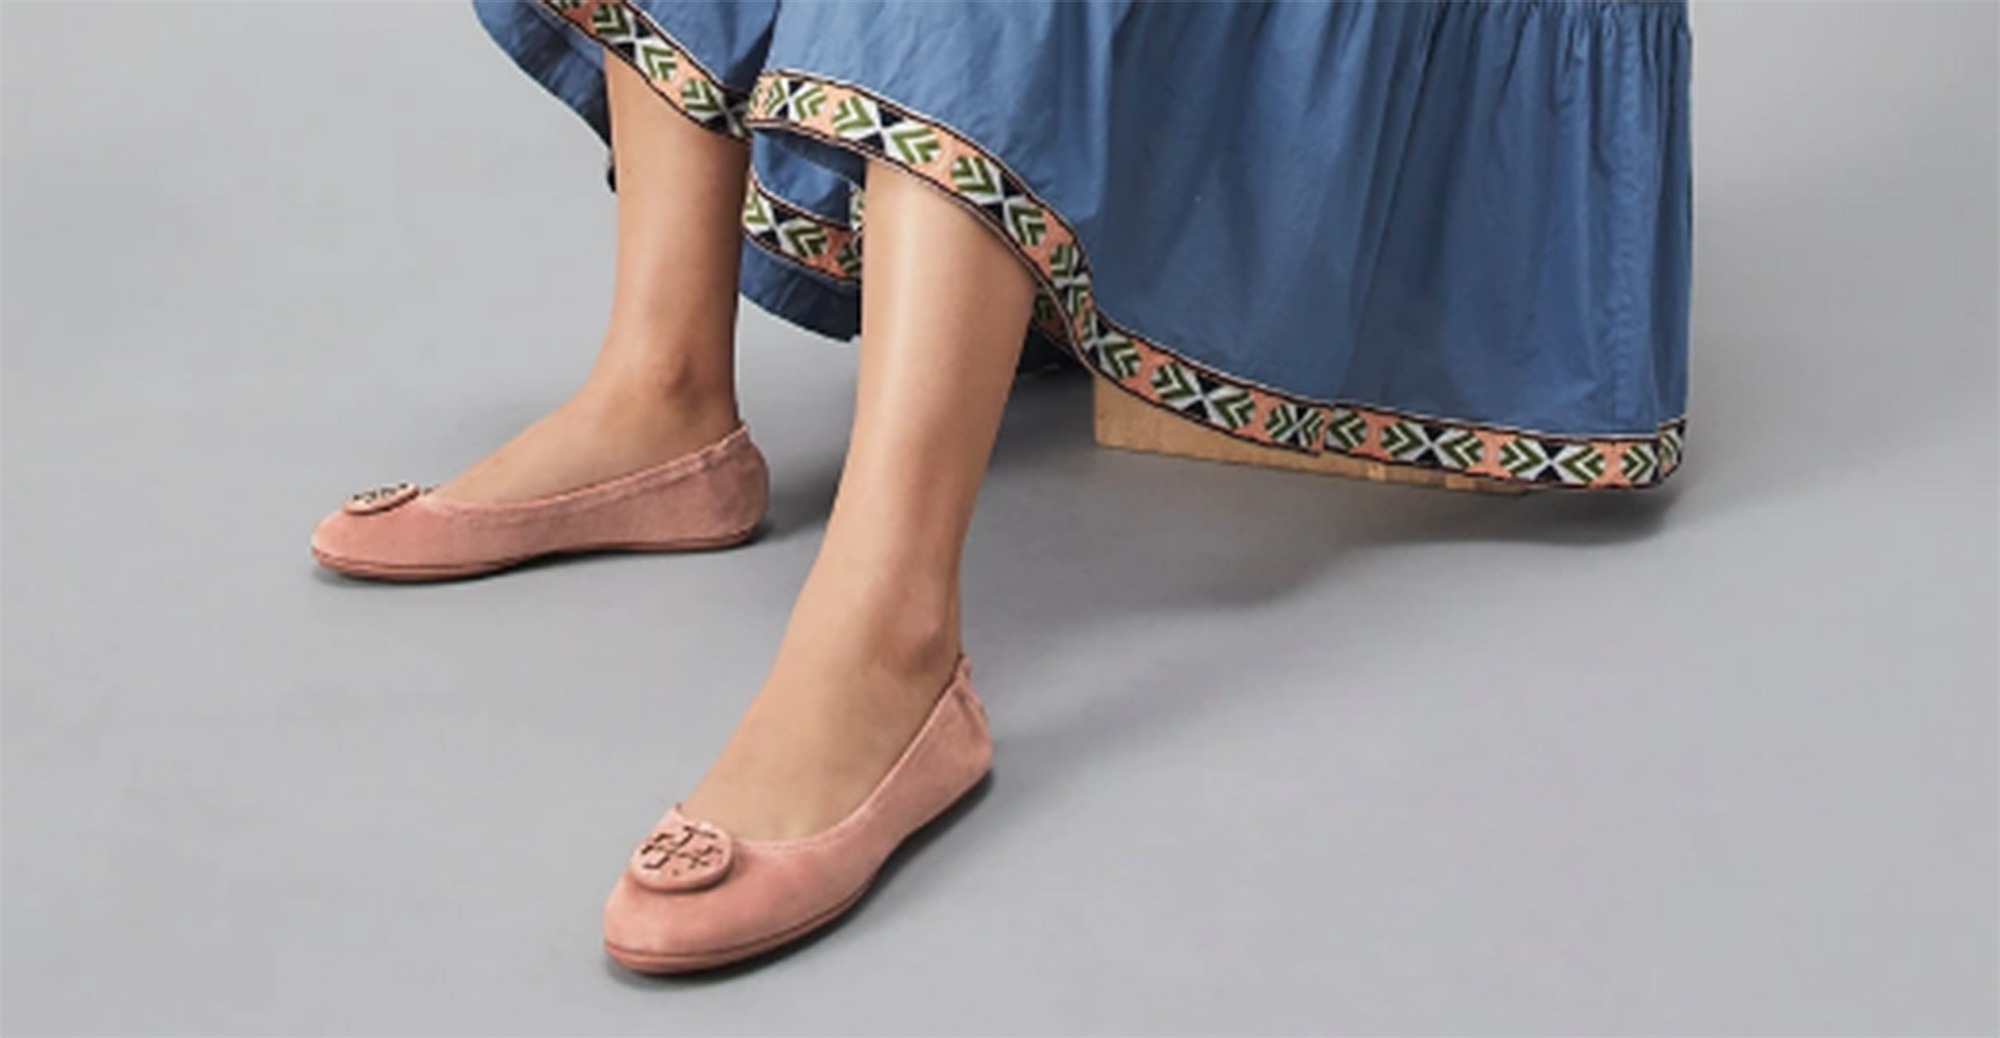 Tory Burch Minnie Flats on Sale: Where to Find Them